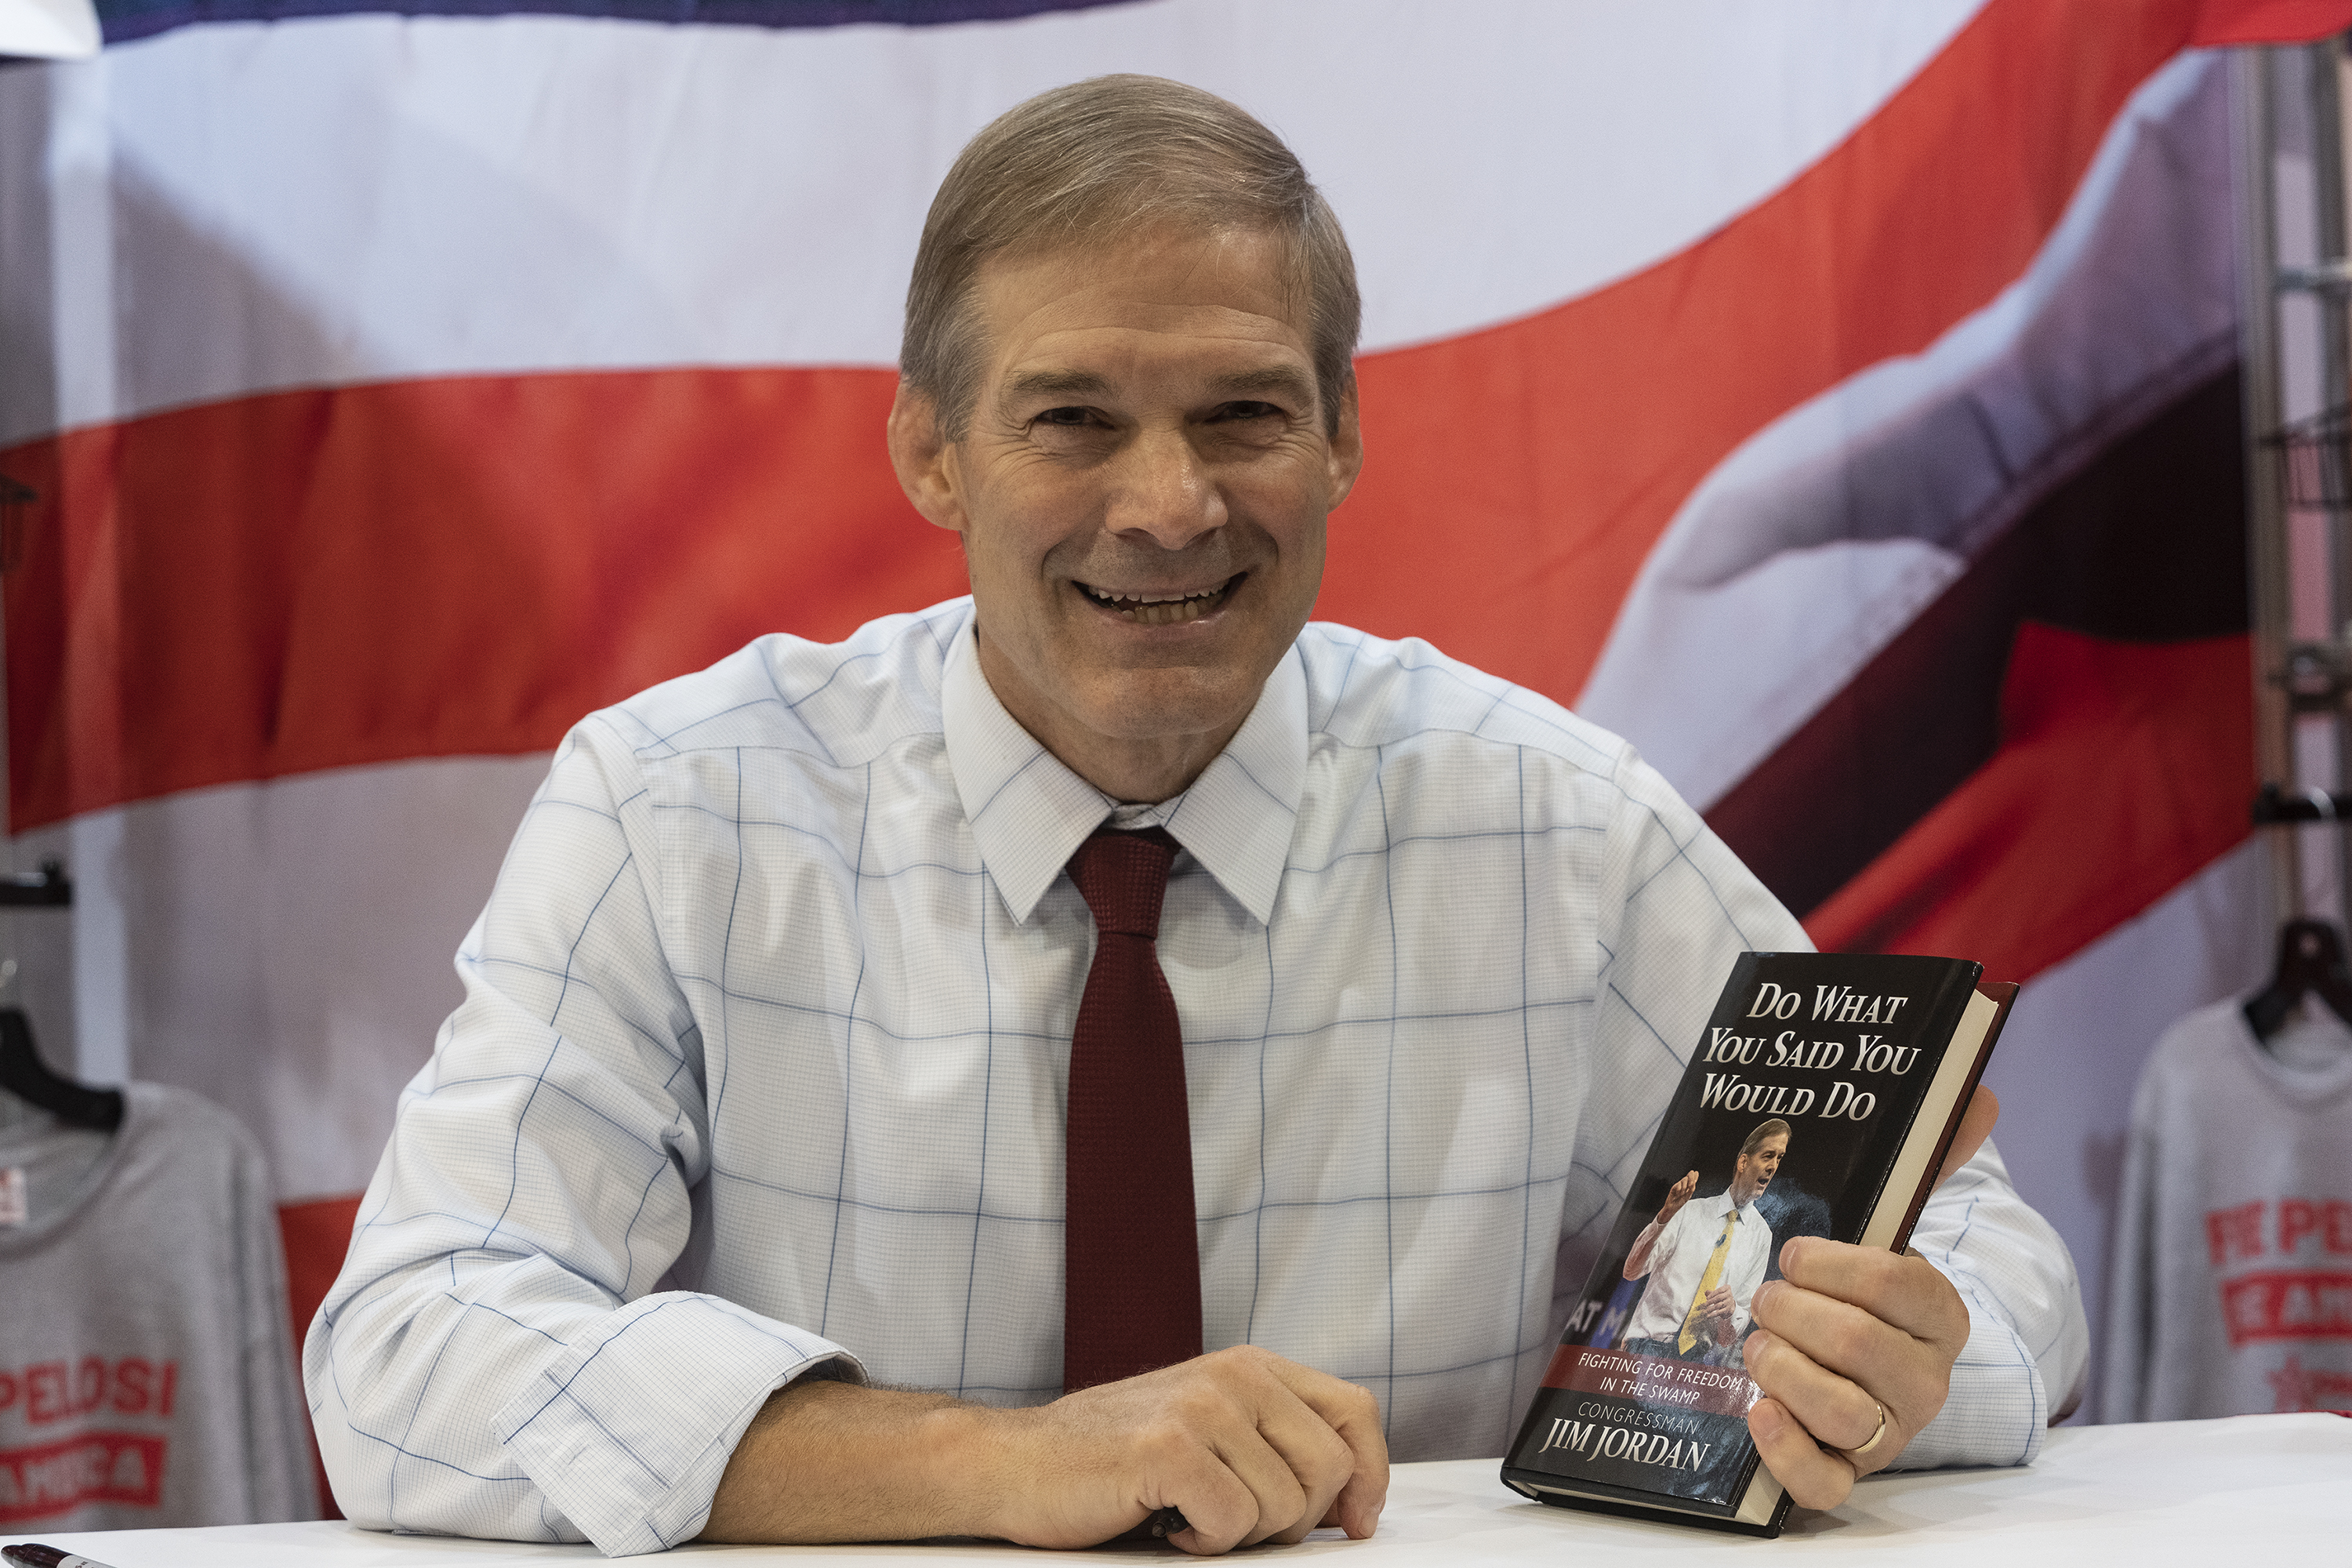 Jim Jordan promotes his book during the CPAC (Conservative Political Action Conference) Texas 2022 conference at Hilton Anatole on August 4, 2022. | Source: Getty Images